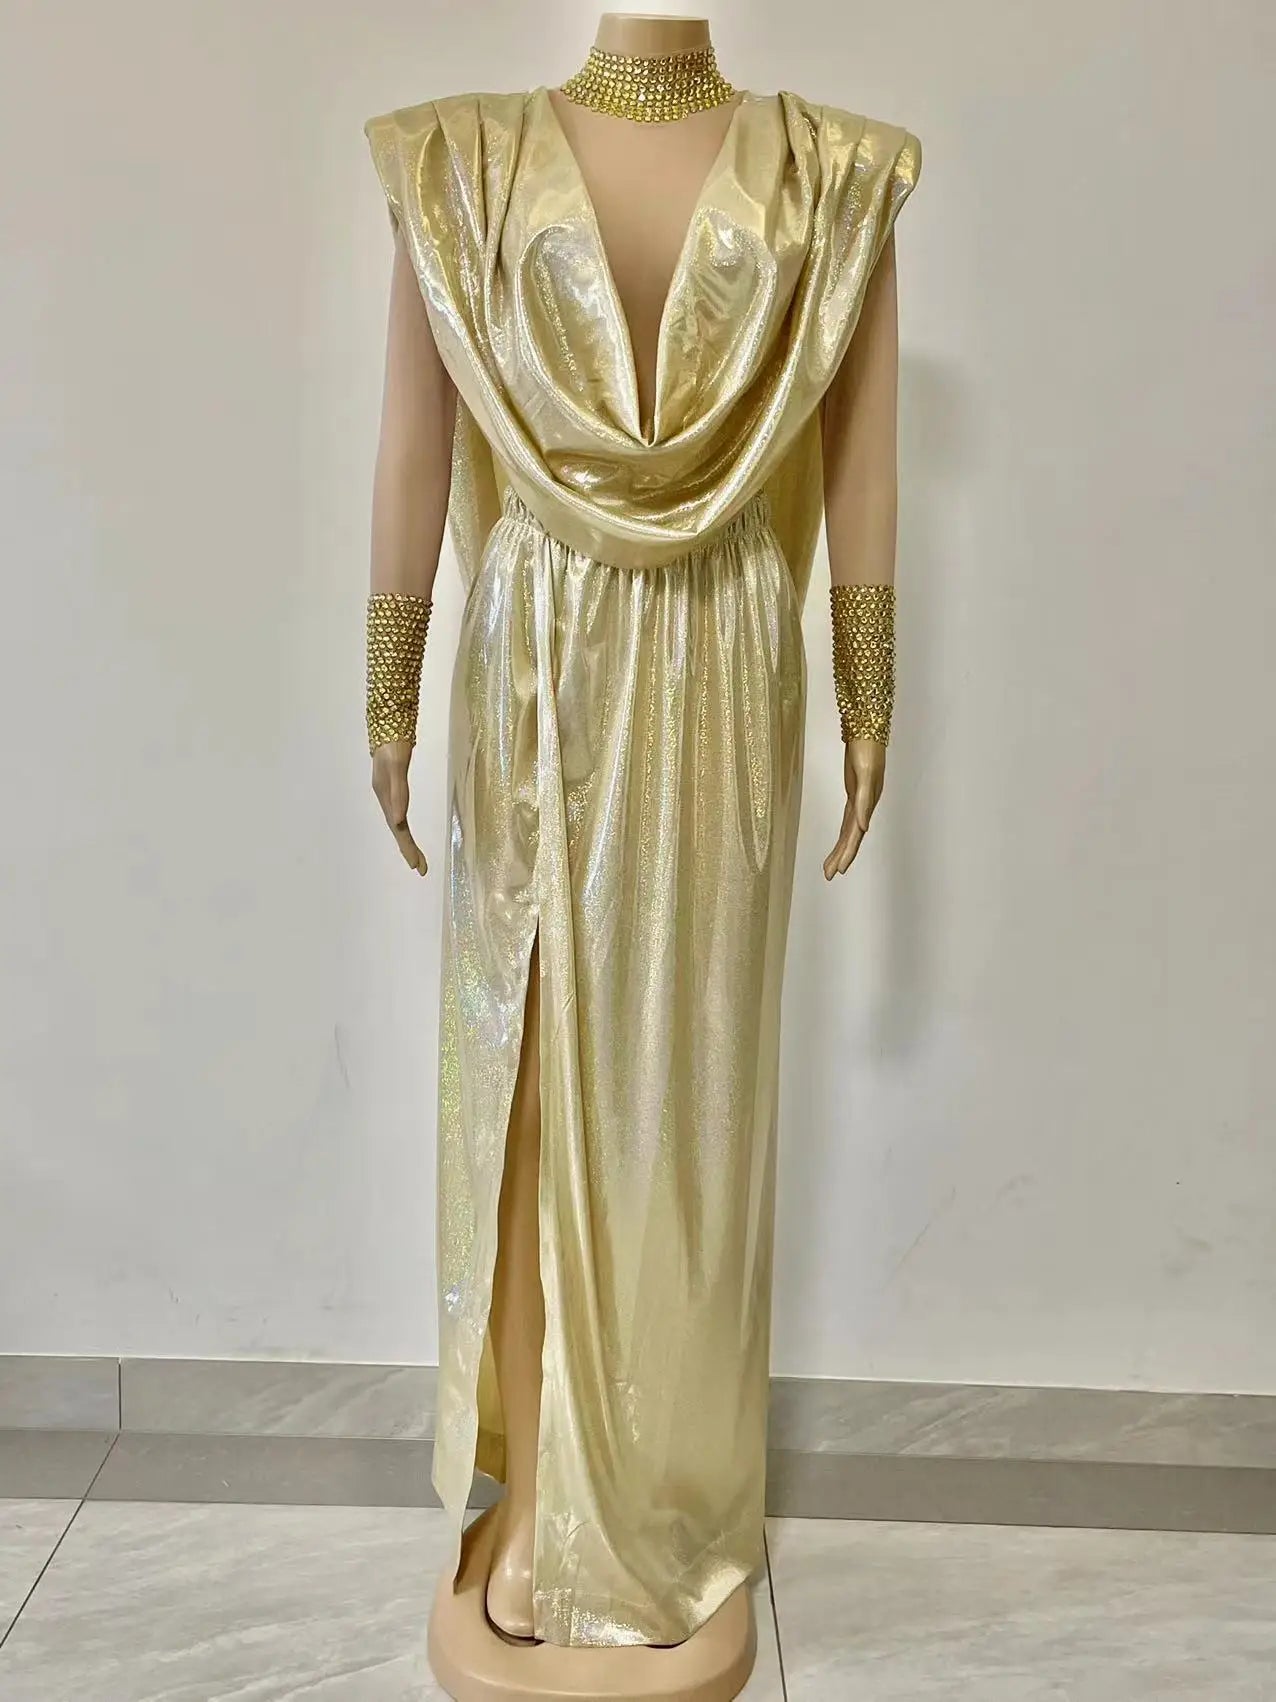 Sexy Stage Bling Gold Evening Backless Rhinestones Dress Birthday Wedding Celebrate Dance Outfit Women Singer Evening